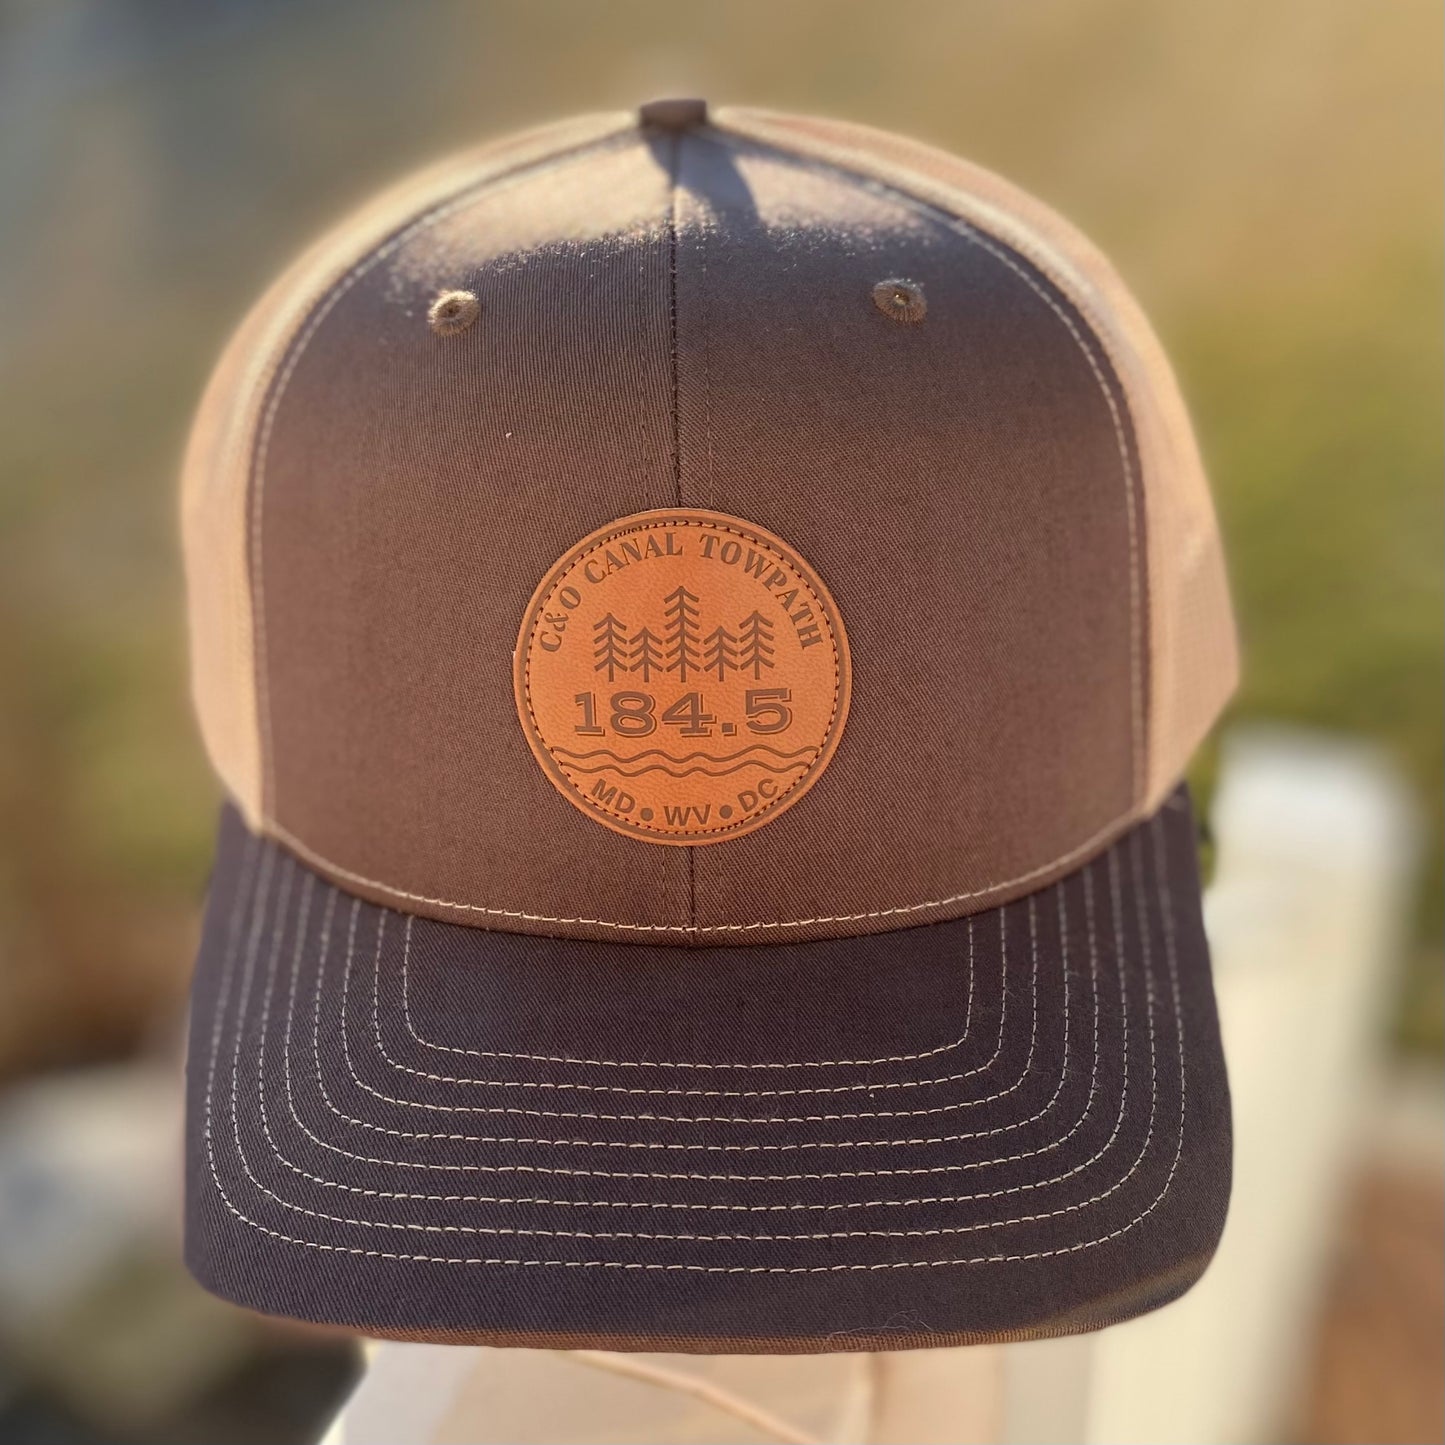 c and o canal trucker hat brown and tan